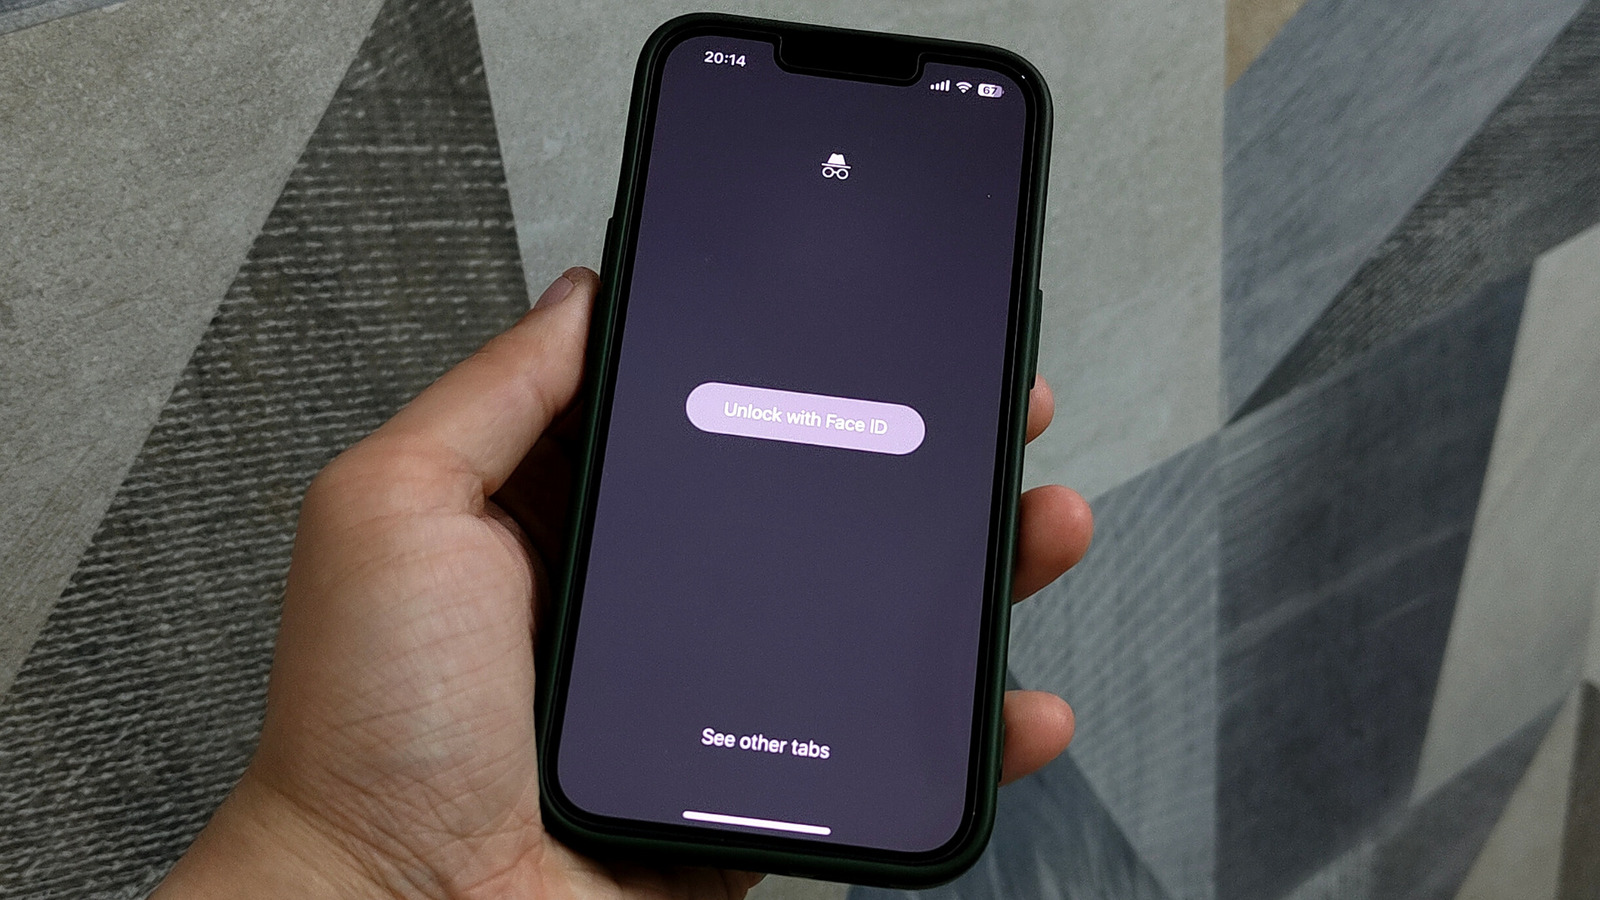 Here’s How To Lock Chrome’s Incognito Mode Tabs With Your Fingerprint On iPhone – SlashGear